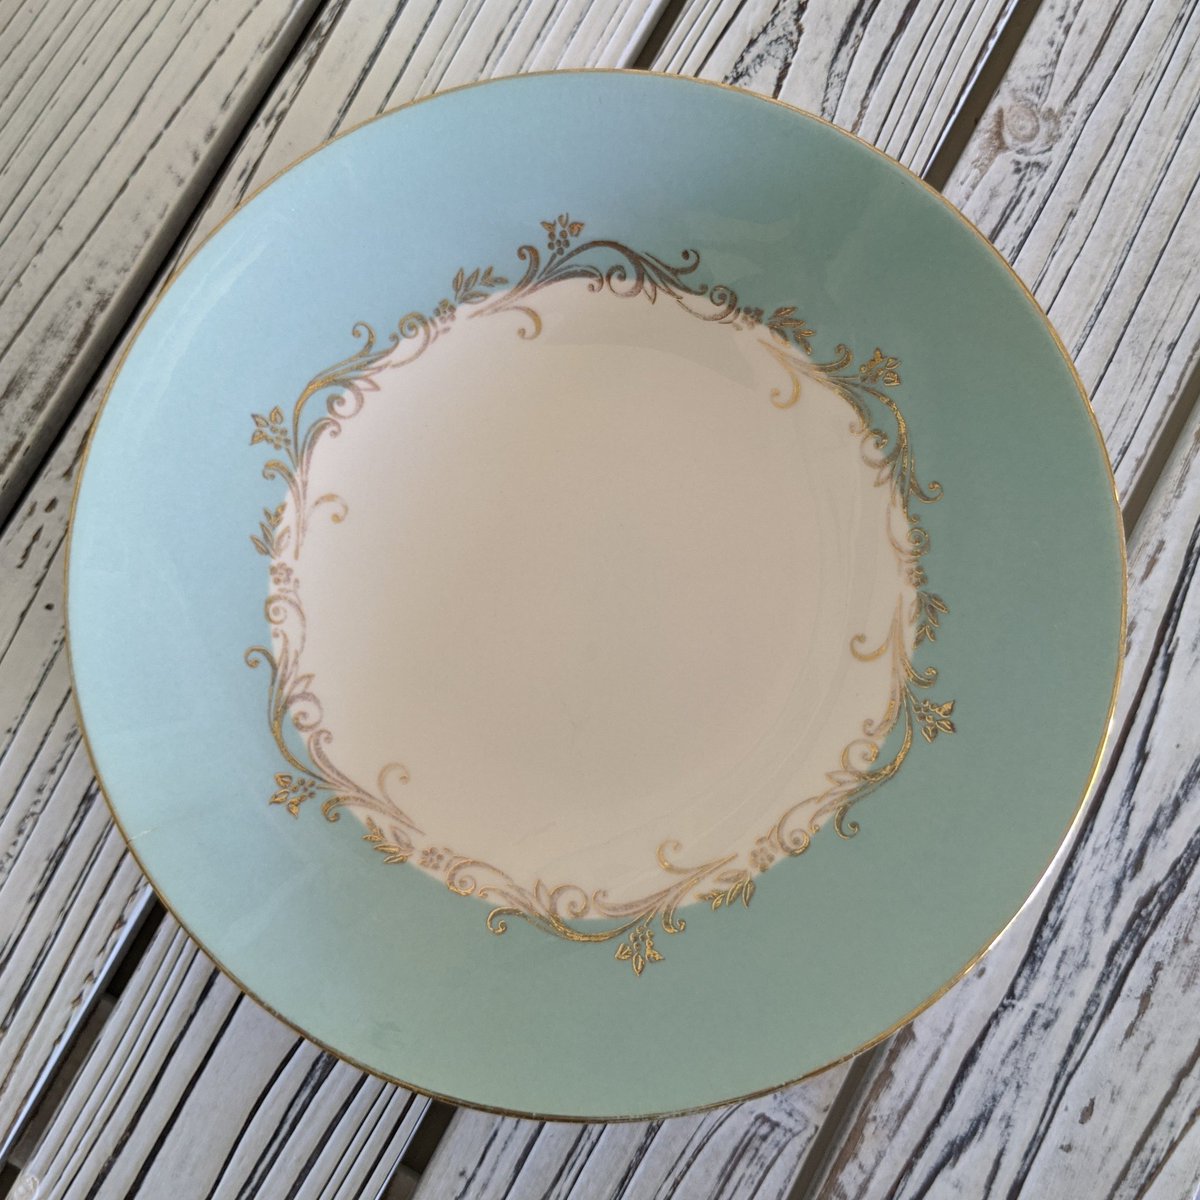 New! 1950s Lifetime China Co 'Gold Crown' soup bowl. Pretty display piece or addition to your set! 8.25' x 1.5' Shop link in bio. $10 #vintage #etsy #vintagechina
#vintagechinacollector #lifetimechina  #goldcrown #vintagedining #soup #soupbowl #teal #1950s #midcenturydining